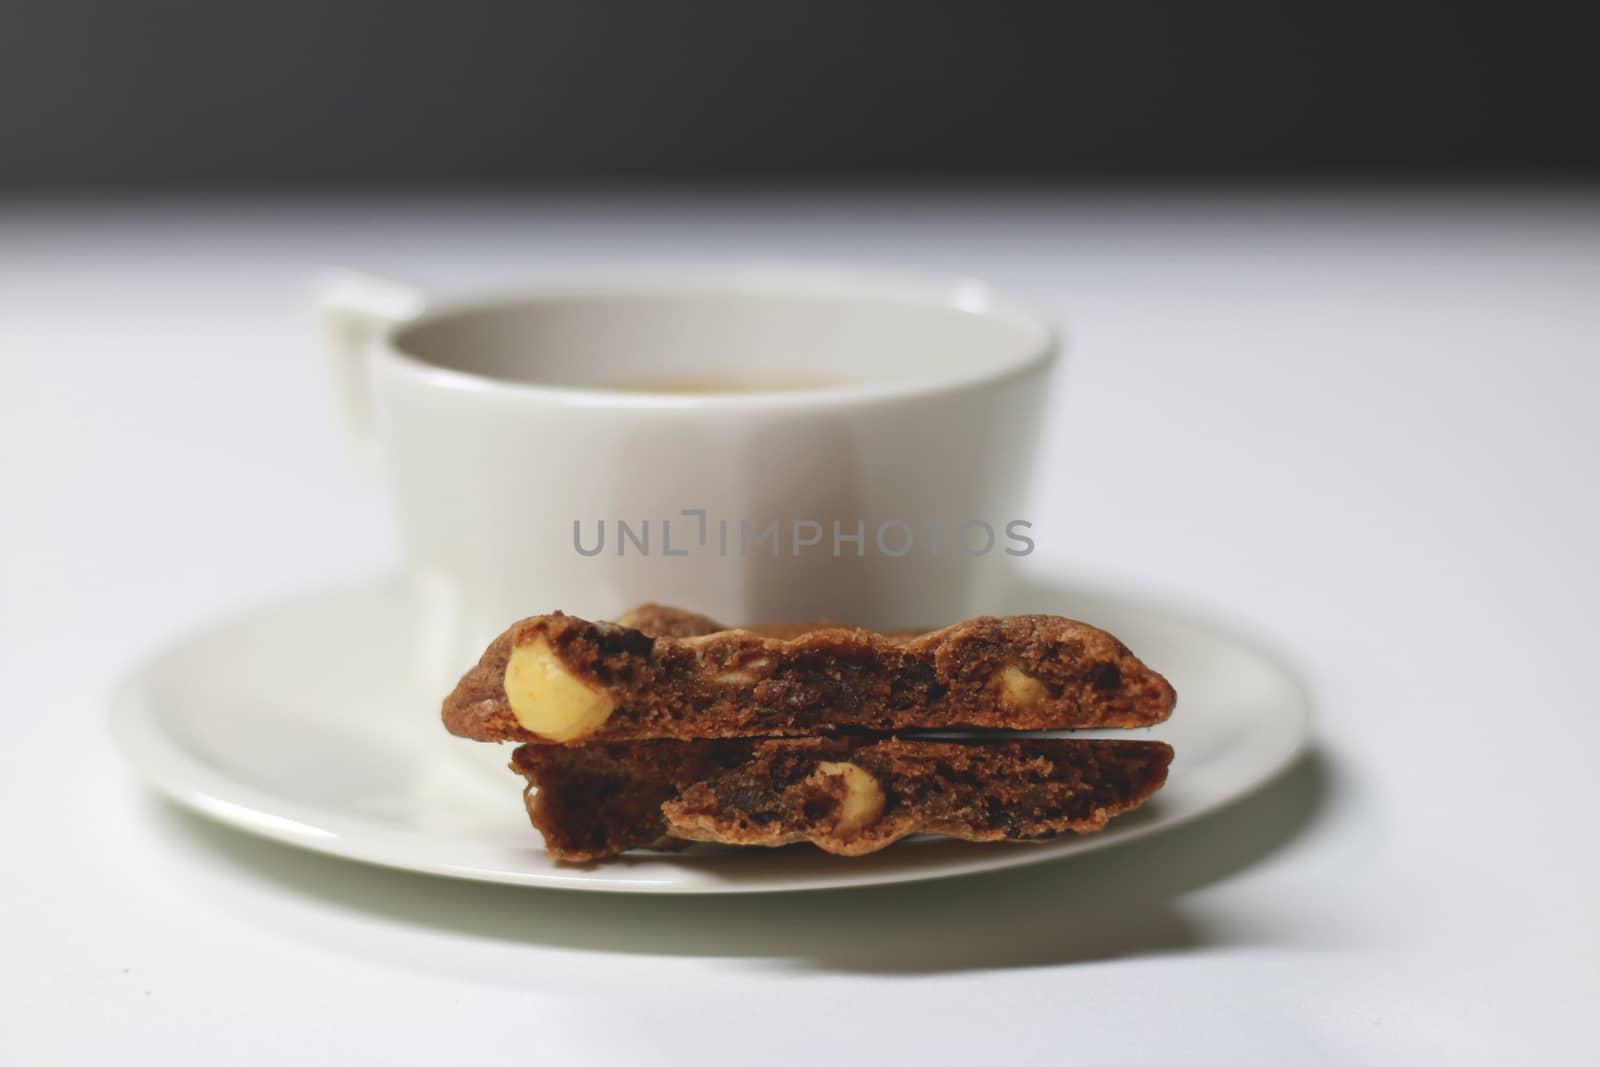 Cookie and cup of coffee on table by uphotopia